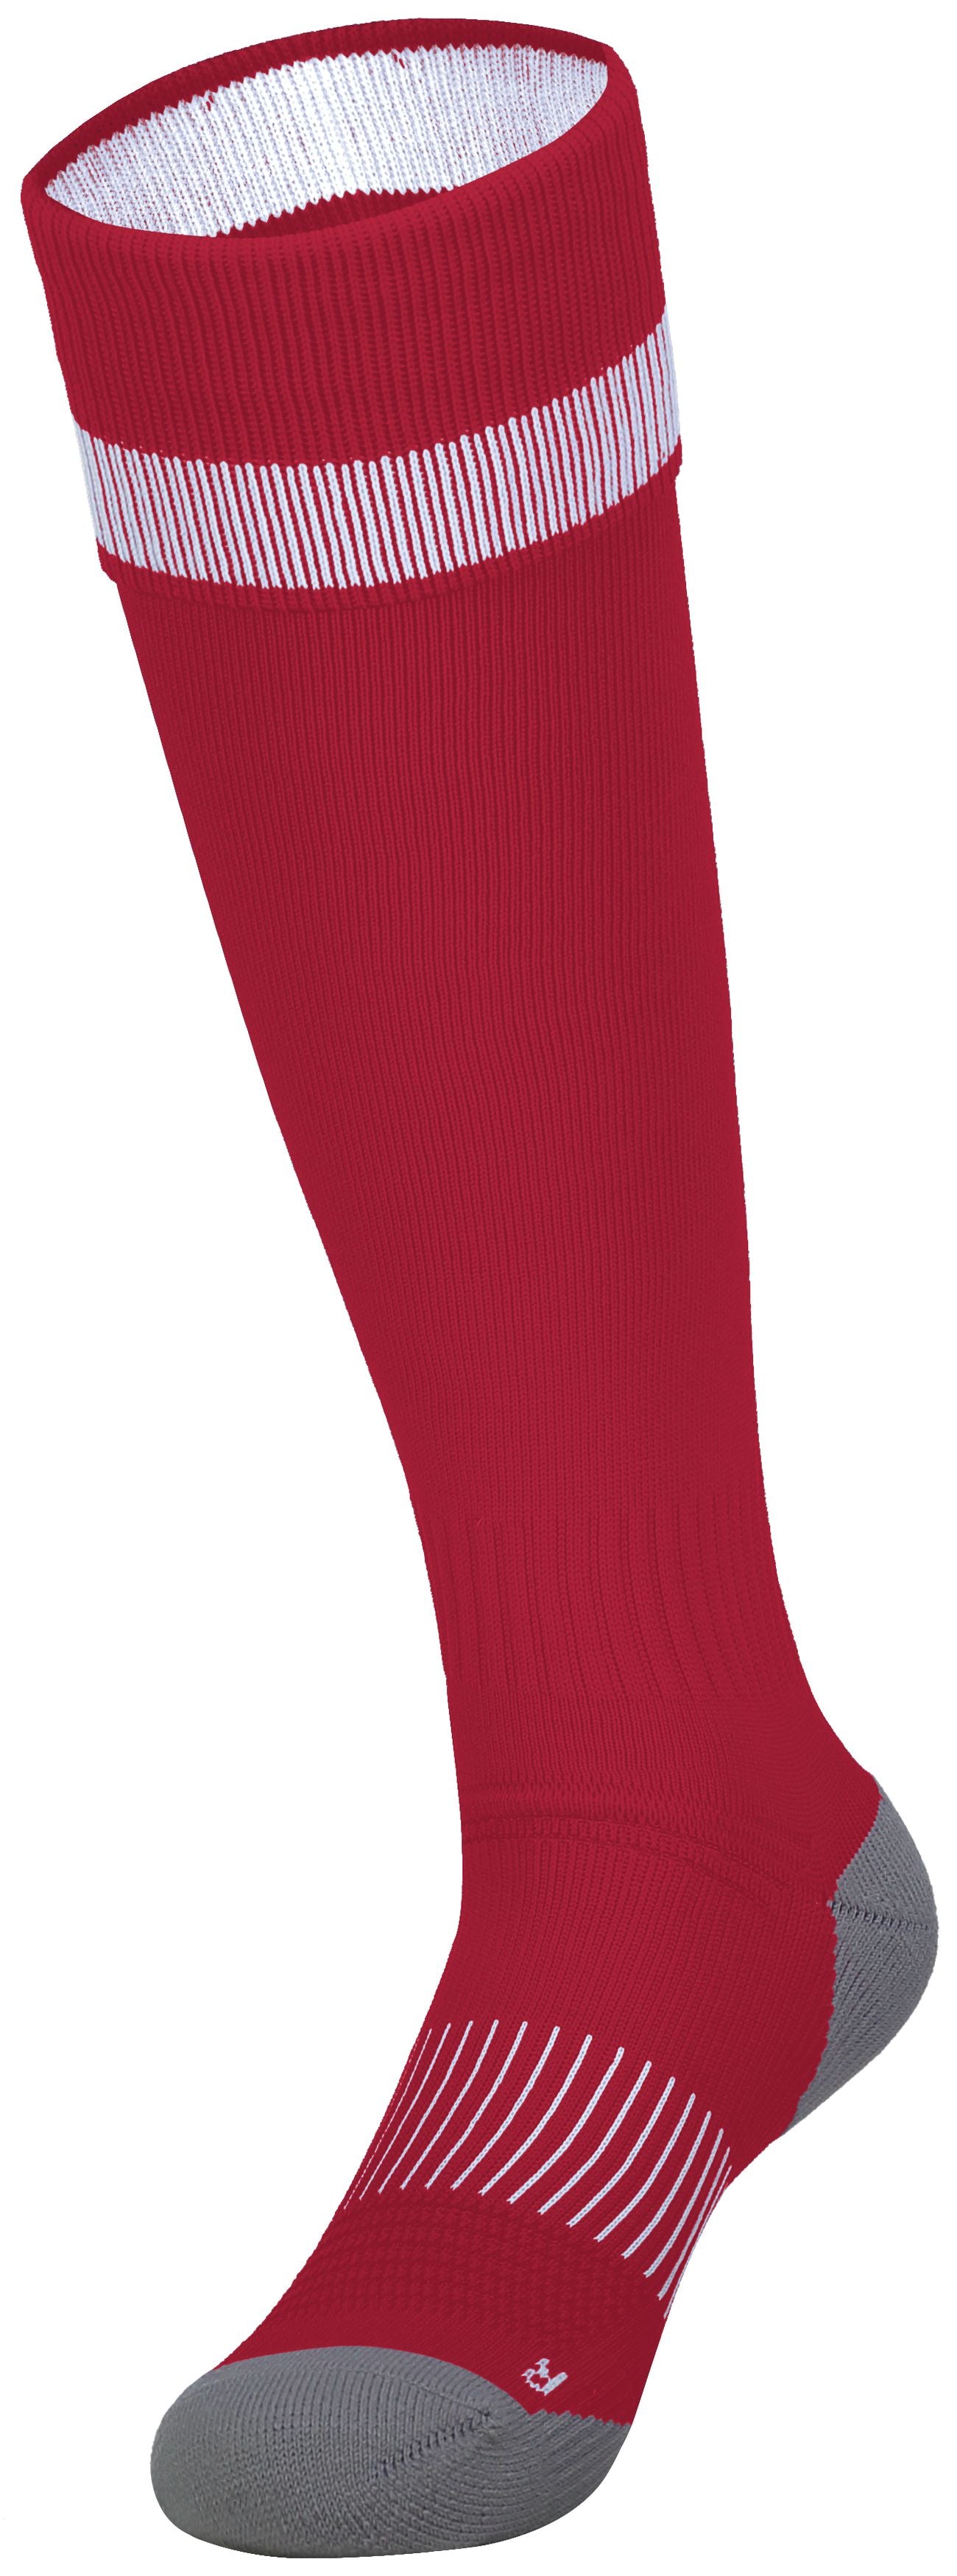 High 5 Impact+ Soccer Sock in Scarlet/White/Graphite  -Part of the Accessories, High5-Products, Accessories-Socks product lines at KanaleyCreations.com